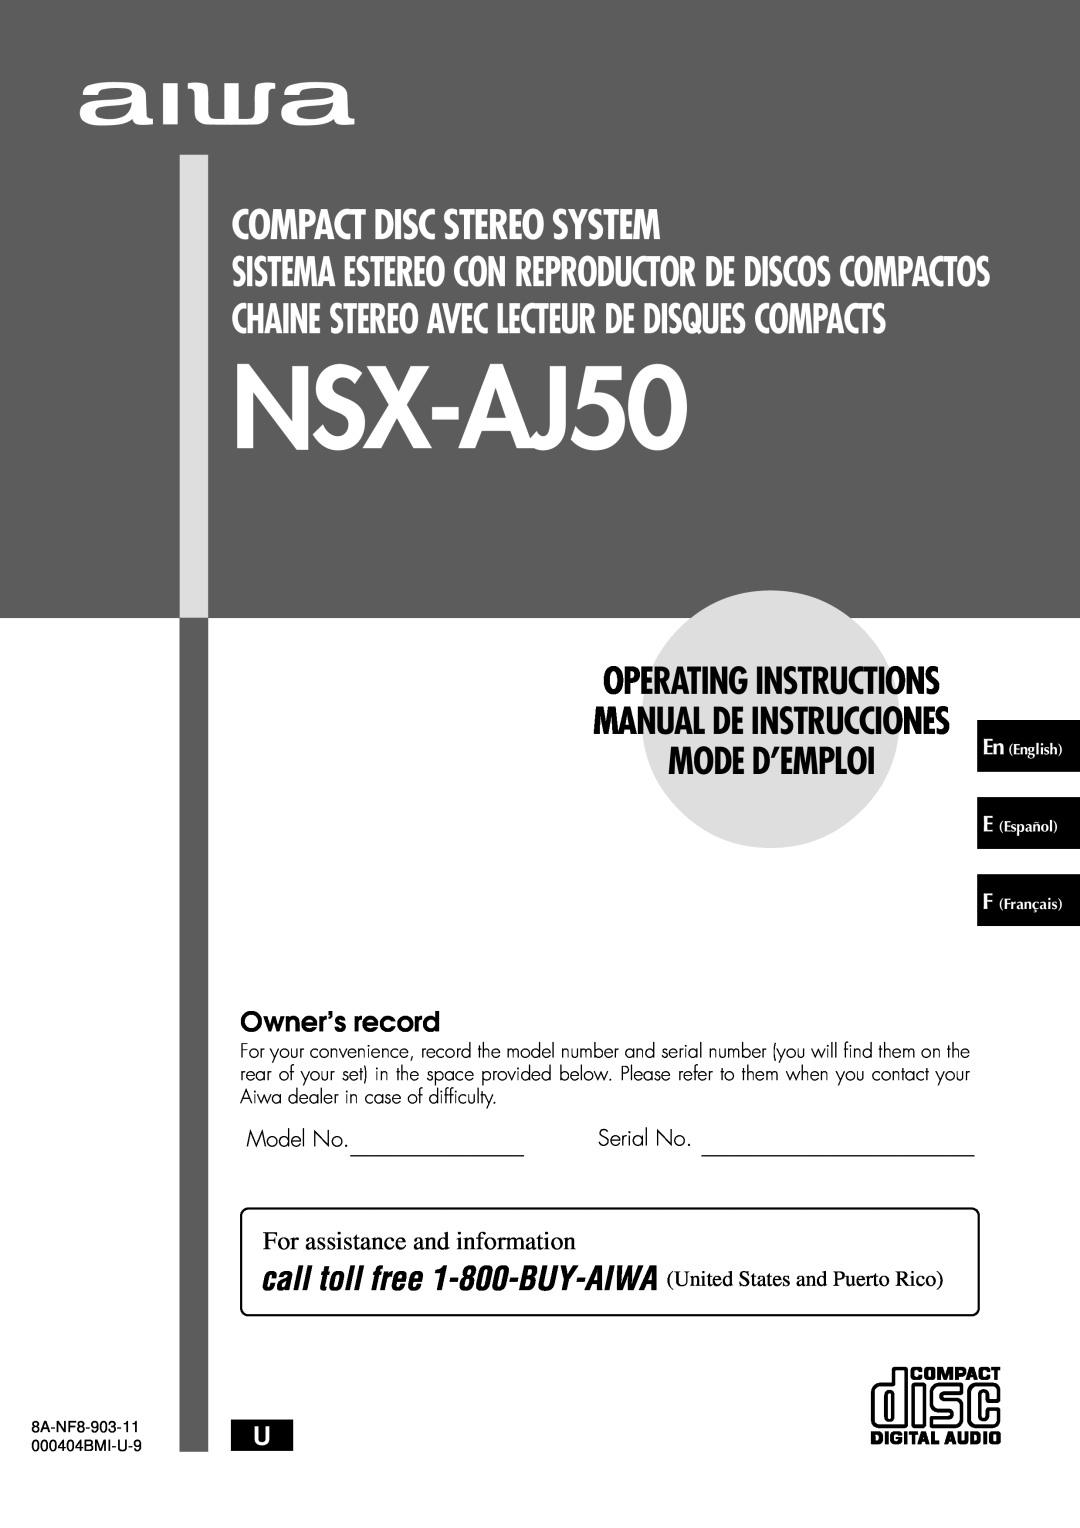 Aiwa NSX-AJ50 operating instructions For assistance and information, United States and Puerto Rico, Owner’s record 